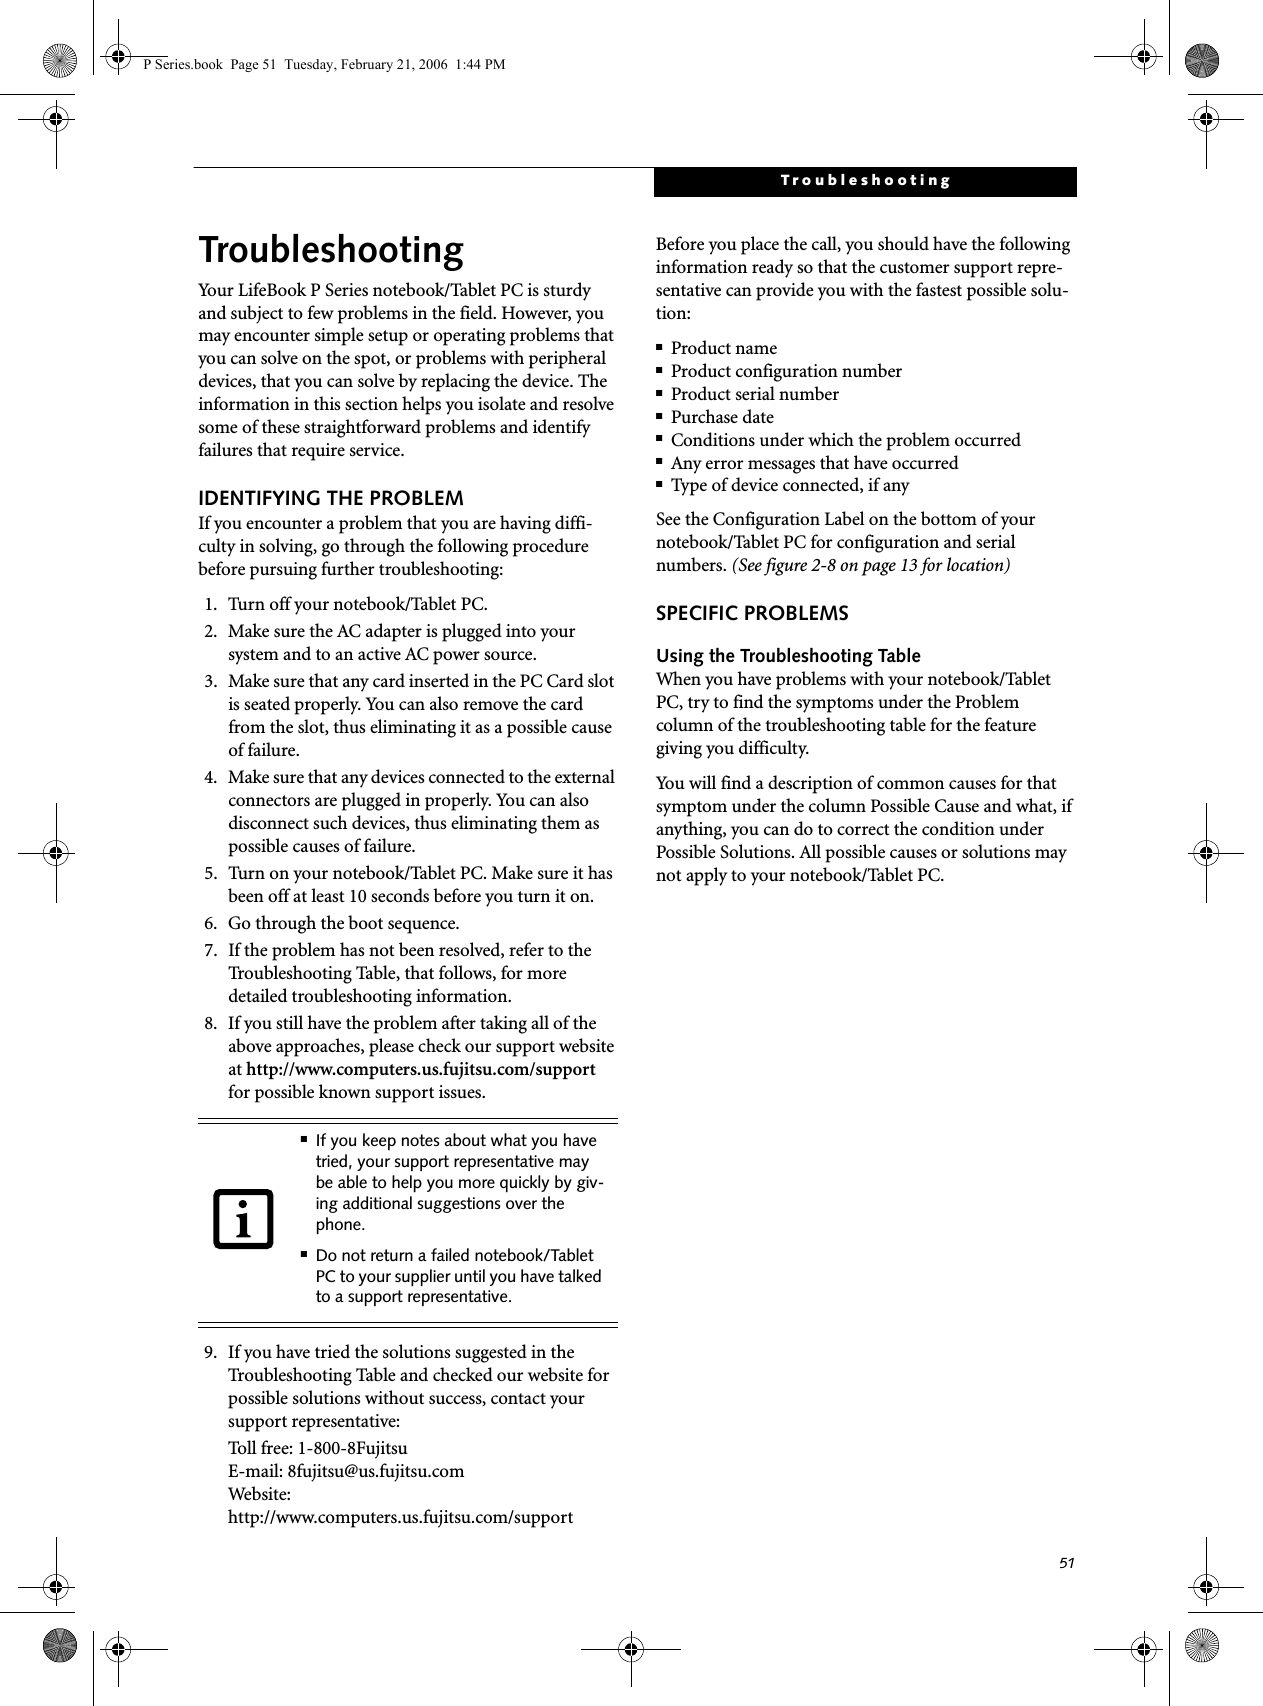 51TroubleshootingTroubleshootingYour LifeBook P Series notebook/Tablet PC is sturdy and subject to few problems in the field. However, you may encounter simple setup or operating problems that you can solve on the spot, or problems with peripheral devices, that you can solve by replacing the device. The information in this section helps you isolate and resolve some of these straightforward problems and identify failures that require service.IDENTIFYING THE PROBLEMIf you encounter a problem that you are having diffi-culty in solving, go through the following procedure before pursuing further troubleshooting:1. Turn off your notebook/Tablet PC.2. Make sure the AC adapter is plugged into your system and to an active AC power source.3. Make sure that any card inserted in the PC Card slot is seated properly. You can also remove the card from the slot, thus eliminating it as a possible cause of failure.4. Make sure that any devices connected to the external connectors are plugged in properly. You can also disconnect such devices, thus eliminating them as possible causes of failure.5. Turn on your notebook/Tablet PC. Make sure it has been off at least 10 seconds before you turn it on.6. Go through the boot sequence.7. If the problem has not been resolved, refer to the Troubleshooting Table, that follows, for more detailed troubleshooting information.8. If you still have the problem after taking all of the above approaches, please check our support website at http://www.computers.us.fujitsu.com/support for possible known support issues. 9. If you have tried the solutions suggested in the Troubleshooting Table and checked our website for possible solutions without success, contact your support representative: Toll free: 1-800-8Fujitsu E-mail: 8fujitsu@us.fujitsu.comWe bs i te : http://www.computers.us.fujitsu.com/supportBefore you place the call, you should have the following information ready so that the customer support repre-sentative can provide you with the fastest possible solu-tion:■Product name■Product configuration number■Product serial number■Purchase date■Conditions under which the problem occurred■Any error messages that have occurred■Type of device connected, if anySee the Configuration Label on the bottom of yournotebook/Tablet PC for configuration and serial numbers. (See figure 2-8 on page 13 for location)SPECIFIC PROBLEMSUsing the Troubleshooting TableWhen you have problems with your notebook/Tablet PC, try to find the symptoms under the Problem column of the troubleshooting table for the feature giving you difficulty. You will find a description of common causes for that symptom under the column Possible Cause and what, if anything, you can do to correct the condition under Possible Solutions. All possible causes or solutions may not apply to your notebook/Tablet PC.■If you keep notes about what you have tried, your support representative may be able to help you more quickly by giv-ing additional suggestions over the phone.■Do not return a failed notebook/Tablet PC to your supplier until you have talked to a support representative.P Series.book  Page 51  Tuesday, February 21, 2006  1:44 PM